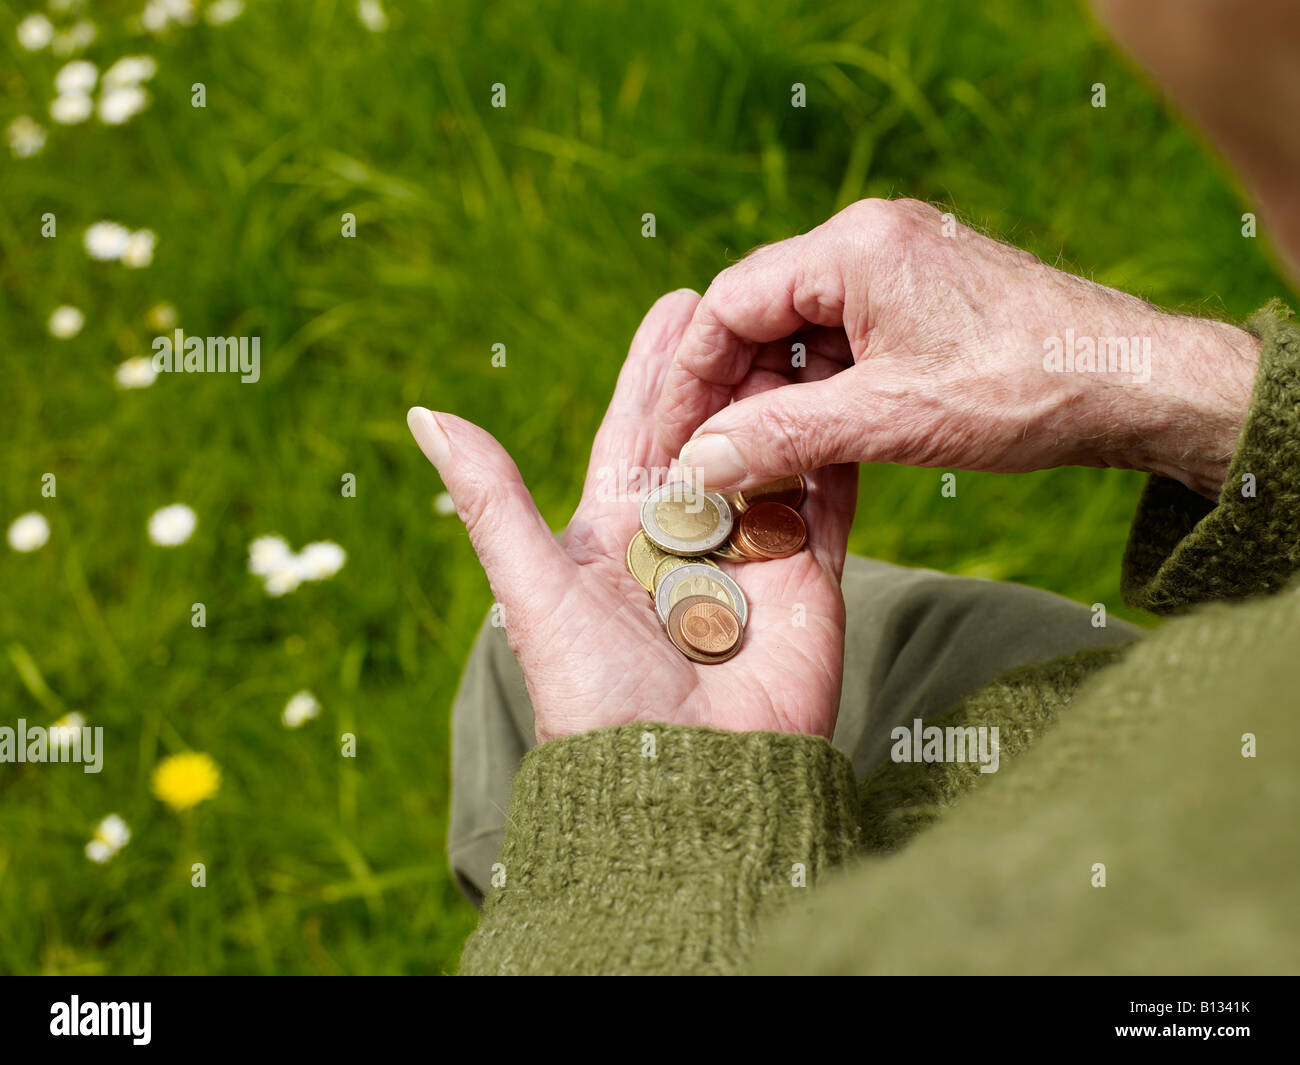 old hands of a senior counting less money, coins Stock Photo